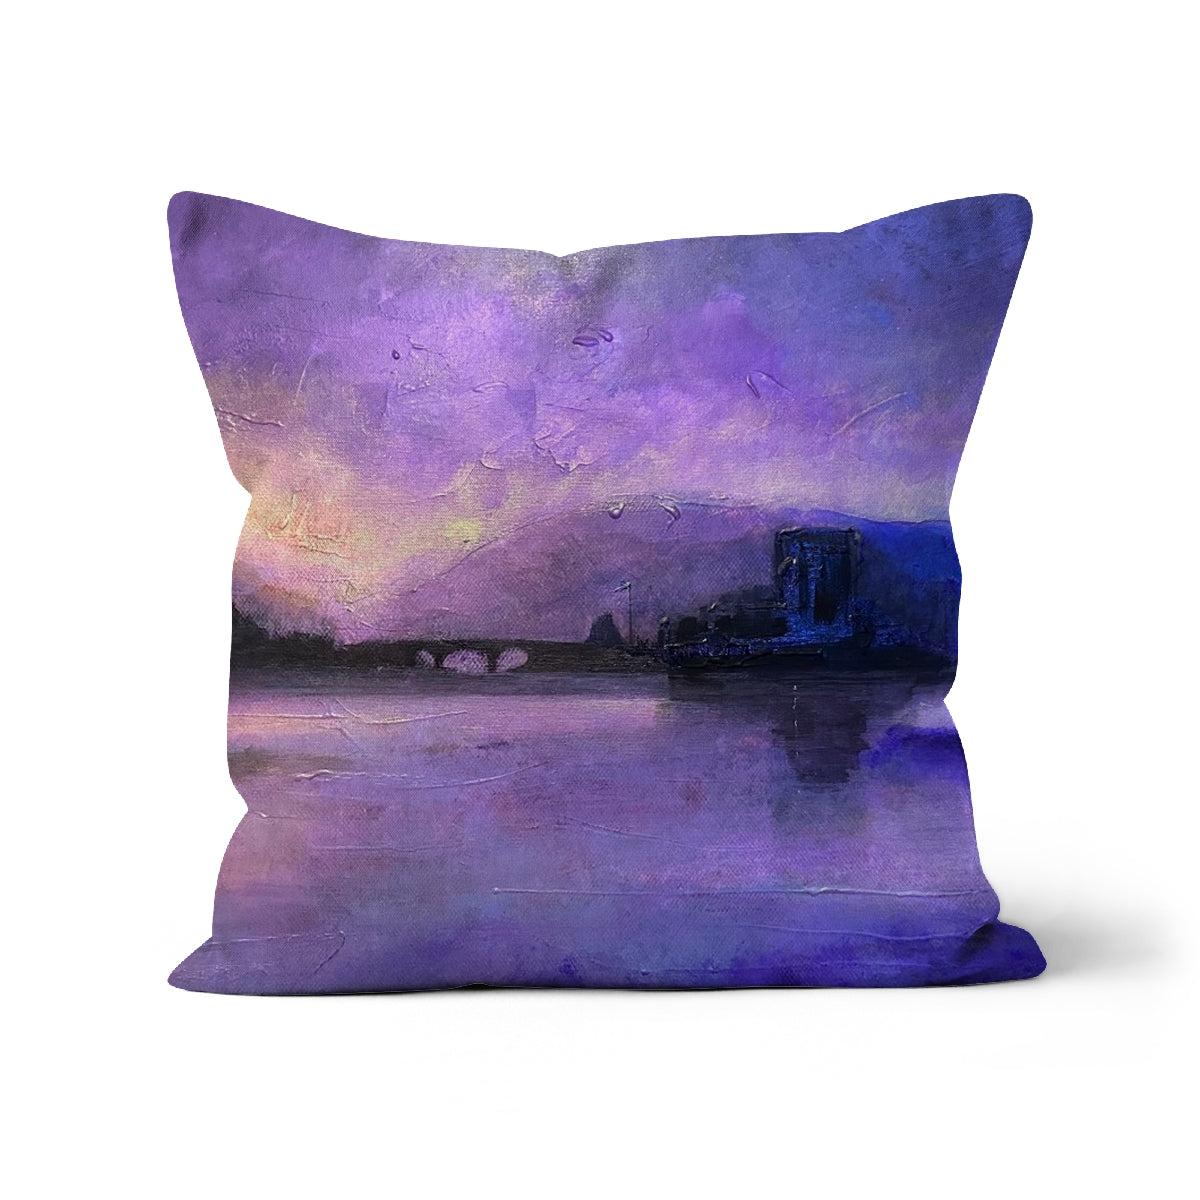 Eilean Donan Castle Moonset Art Gifts Cushion-Cushions-Historic & Iconic Scotland Art Gallery-Faux Suede-22"x22"-Paintings, Prints, Homeware, Art Gifts From Scotland By Scottish Artist Kevin Hunter